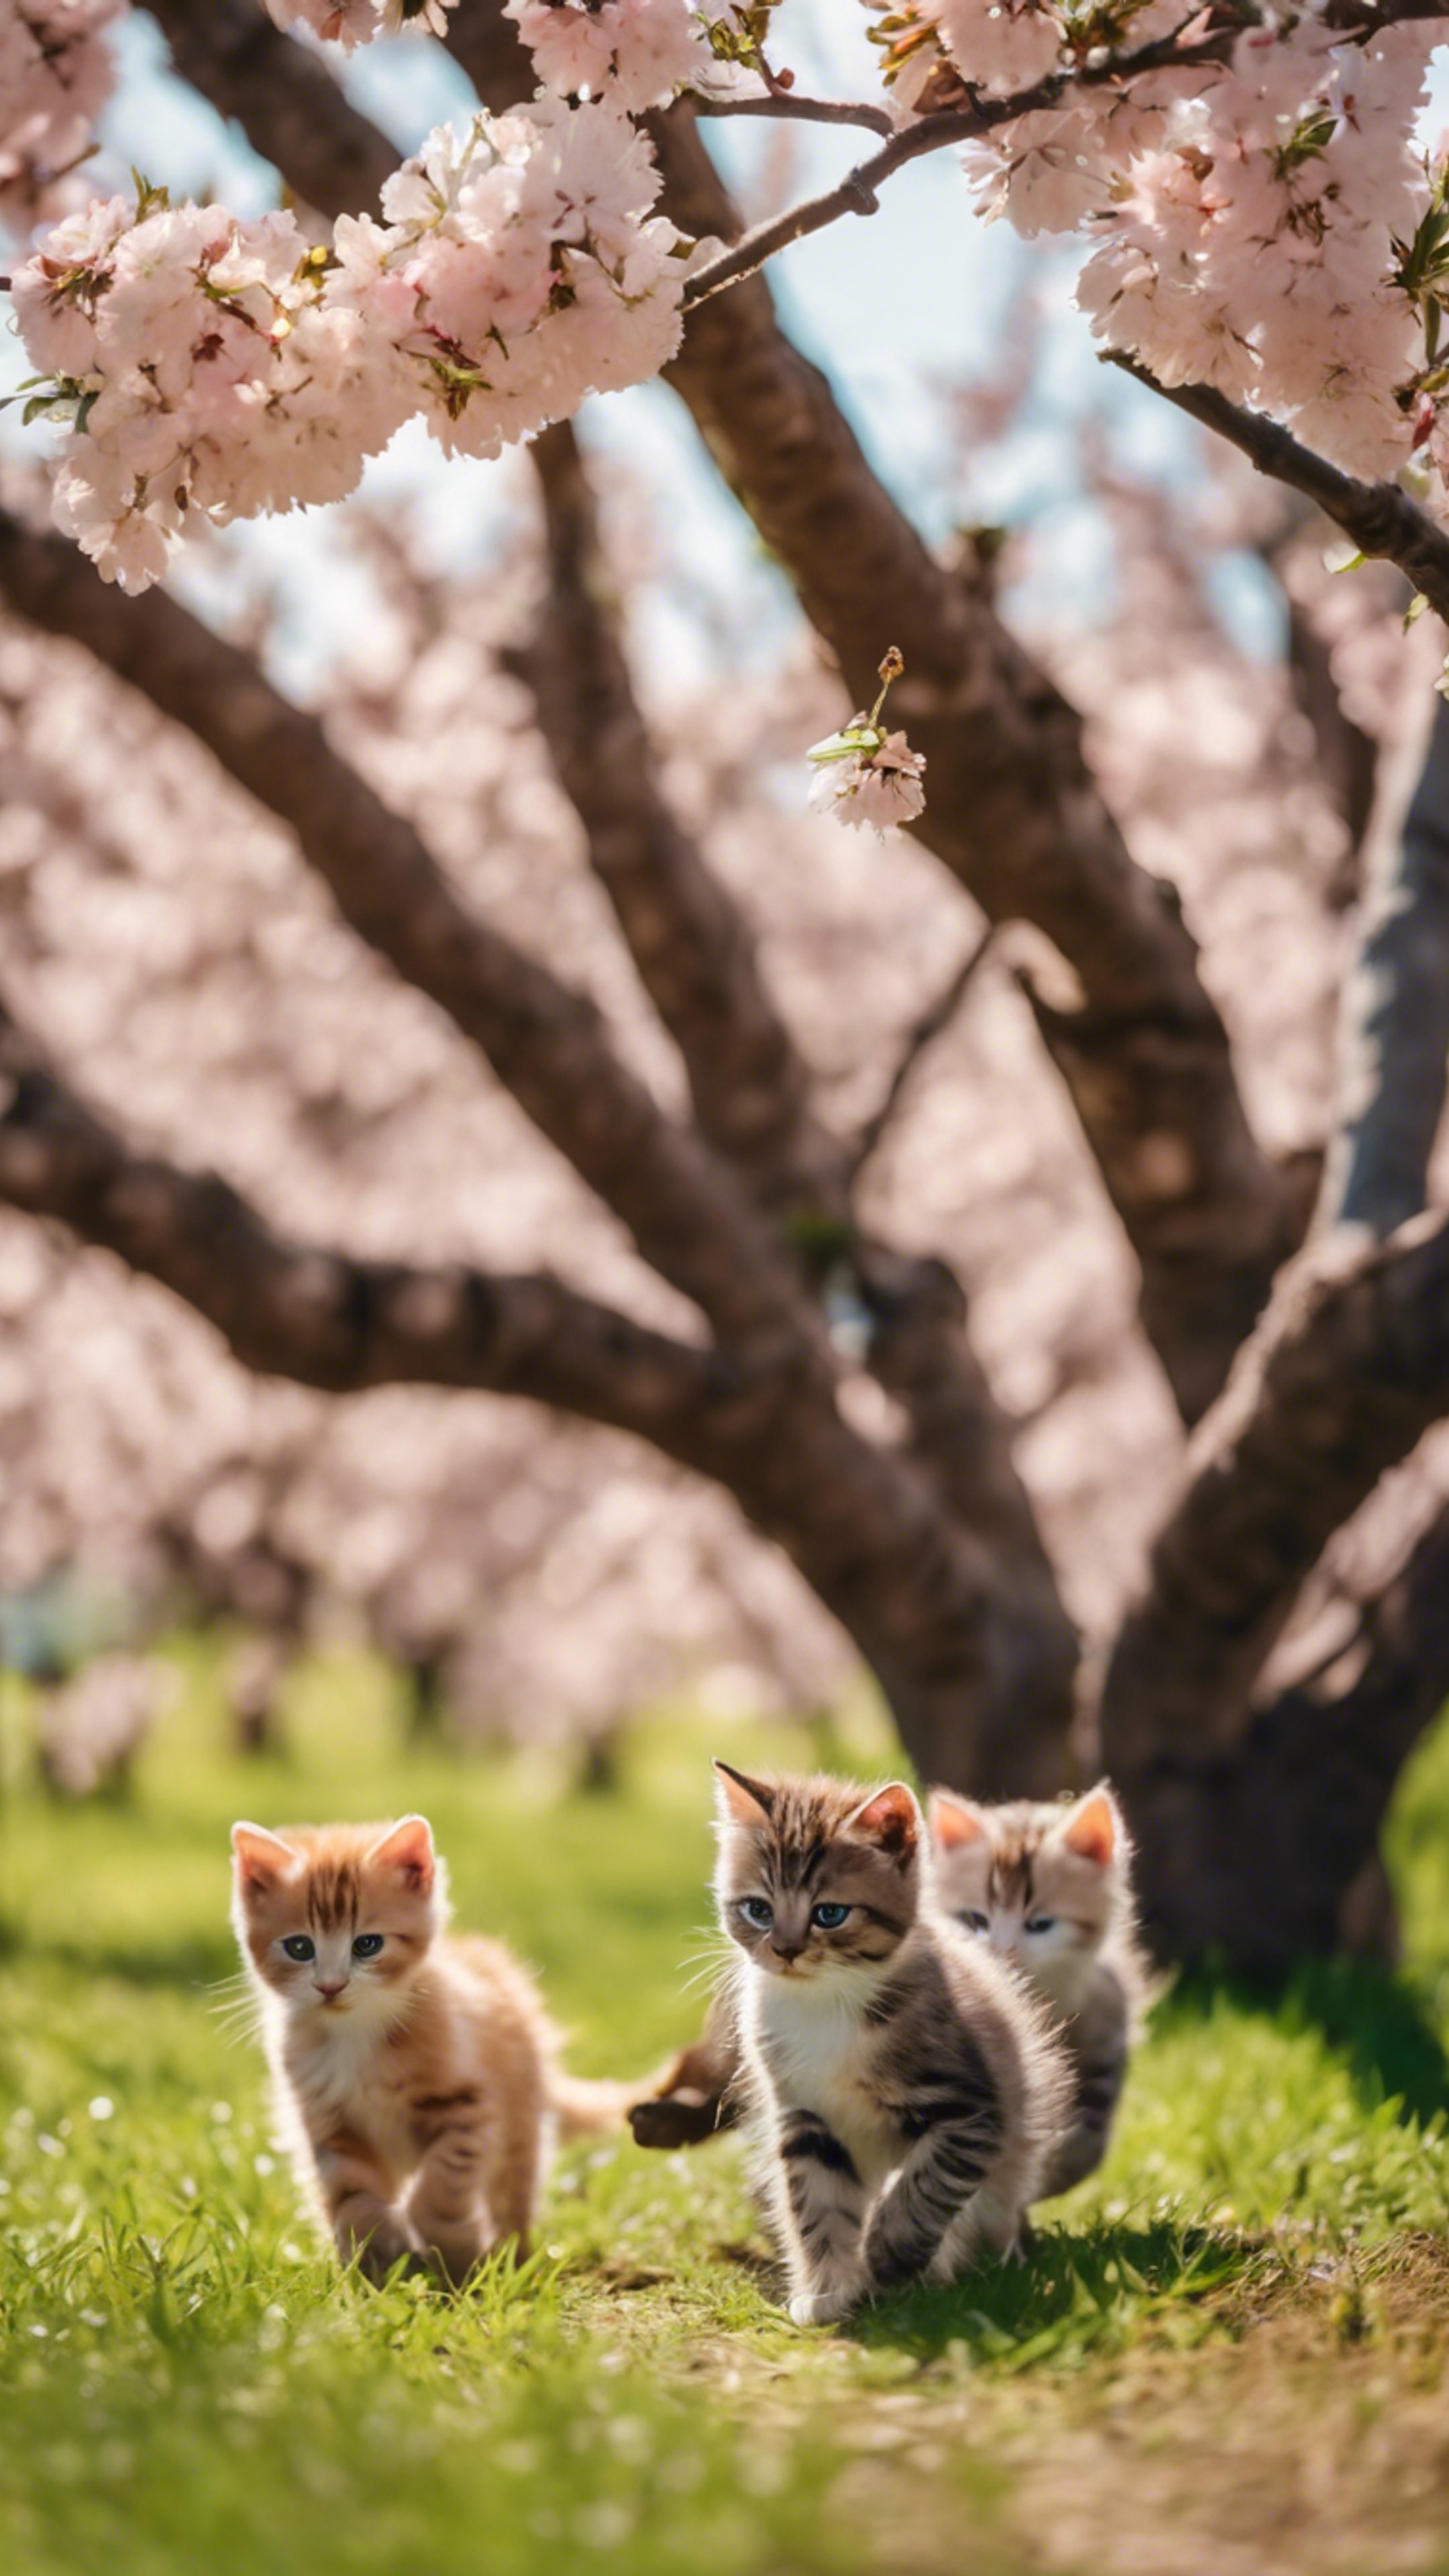 A group of multi-colored kittens chasing their shadows under a peach tree during a beautiful spring afternoon.壁紙[1b8583aedfab46758668]